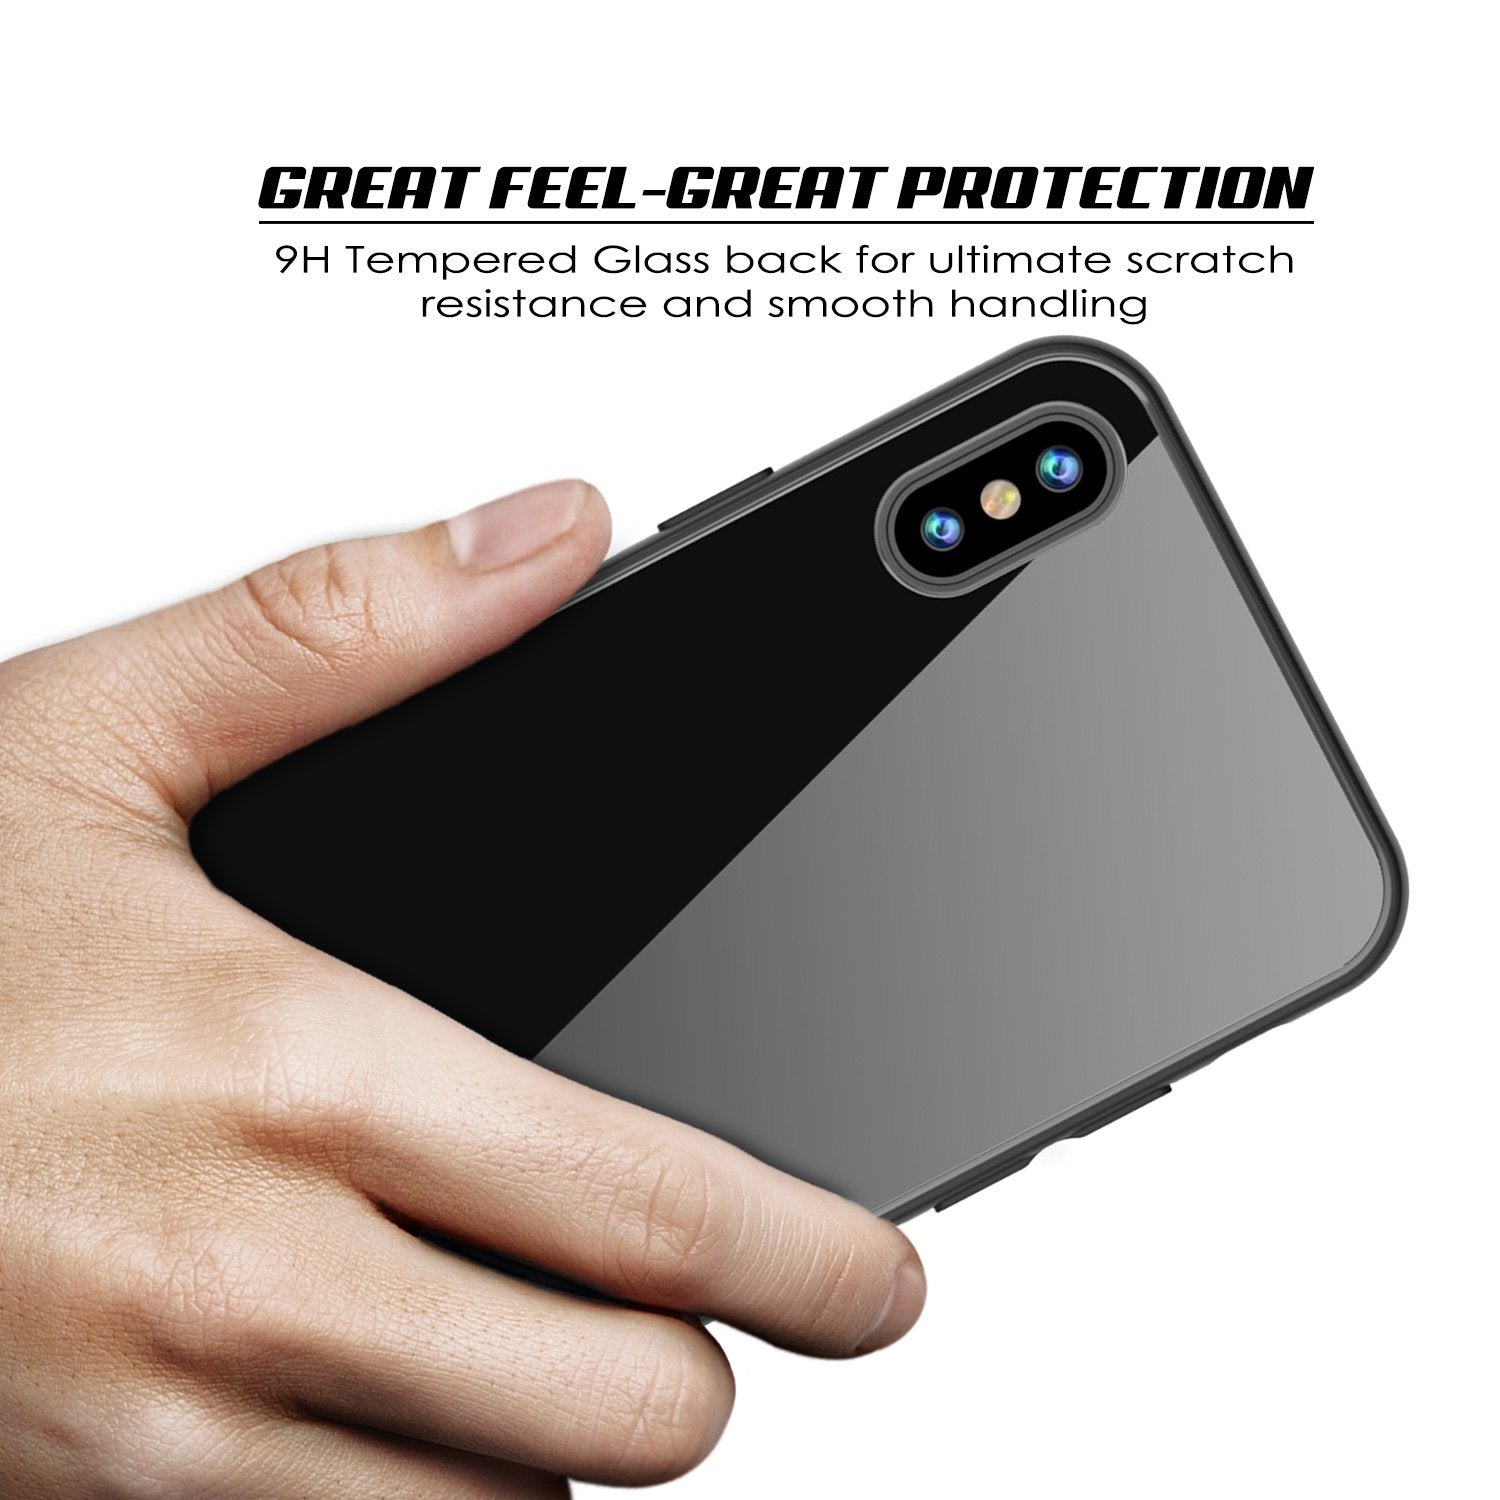 iPhone X Case, Punkcase GlassShield Ultra Thin Protective 9H Full Body Tempered Glass Cover W/ Drop Protection & Non Slip Grip for Apple iPhone 10 [Black]